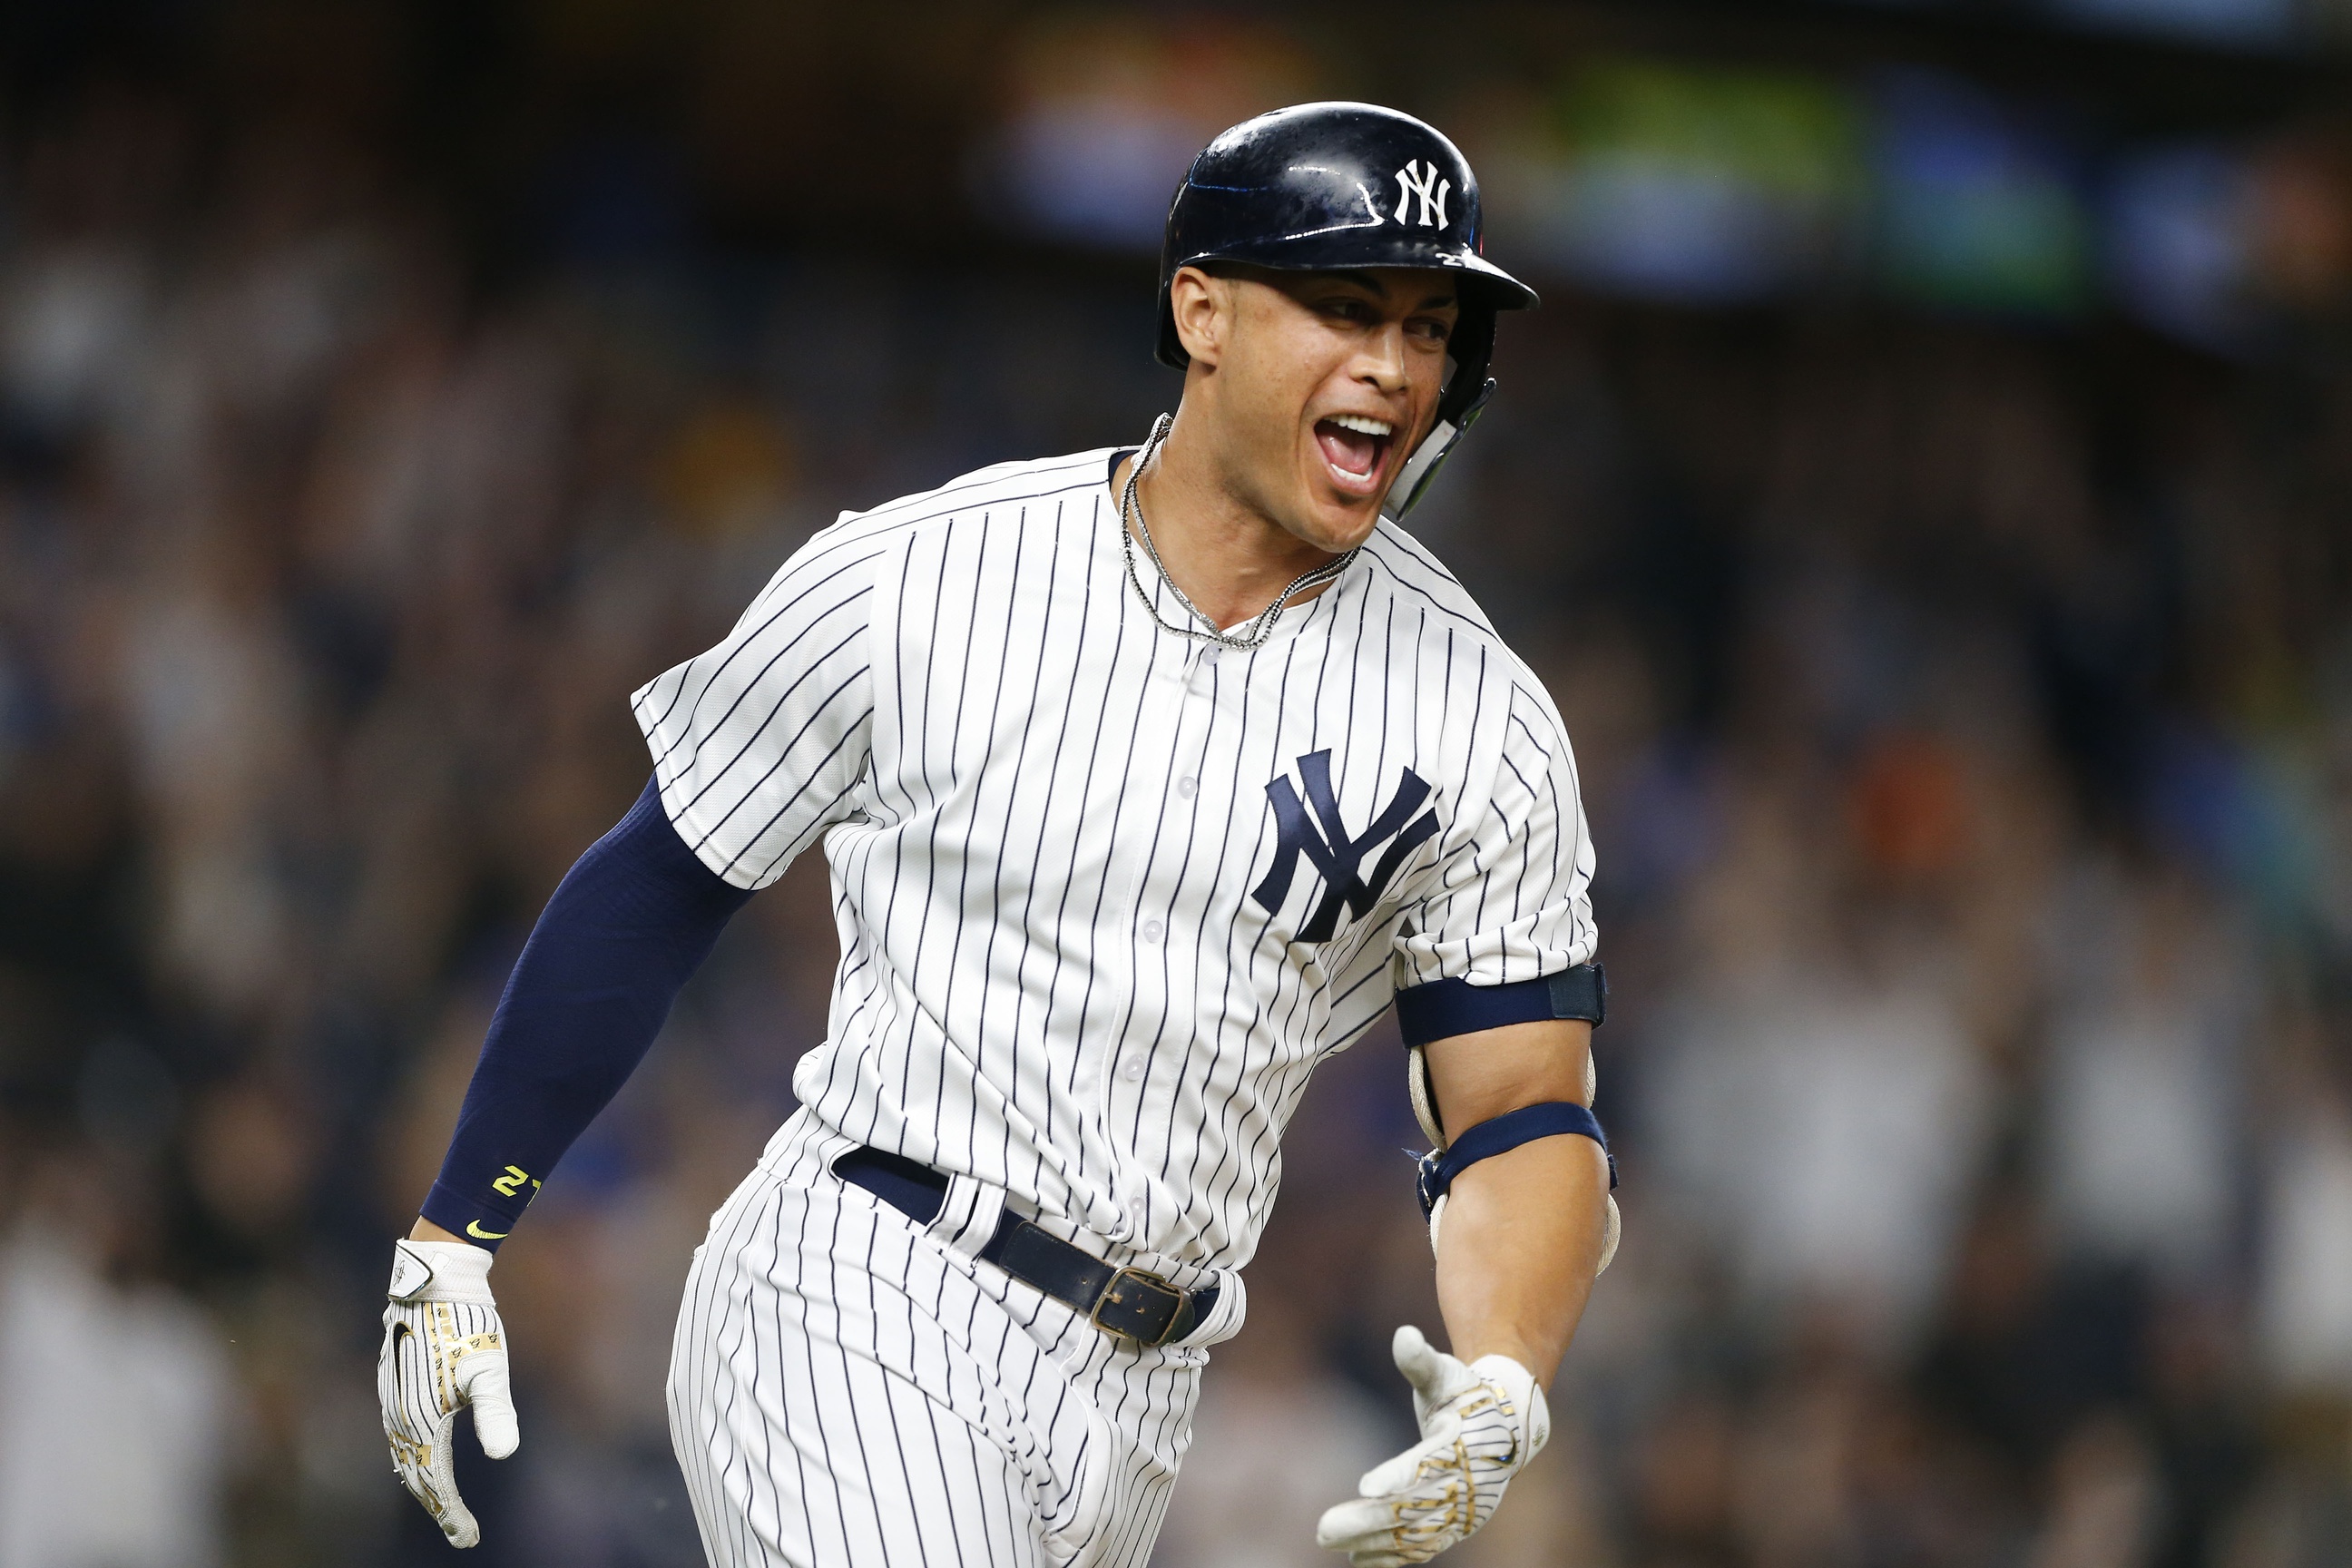 what has happened to GIANCARLO STANTON? sports vids on